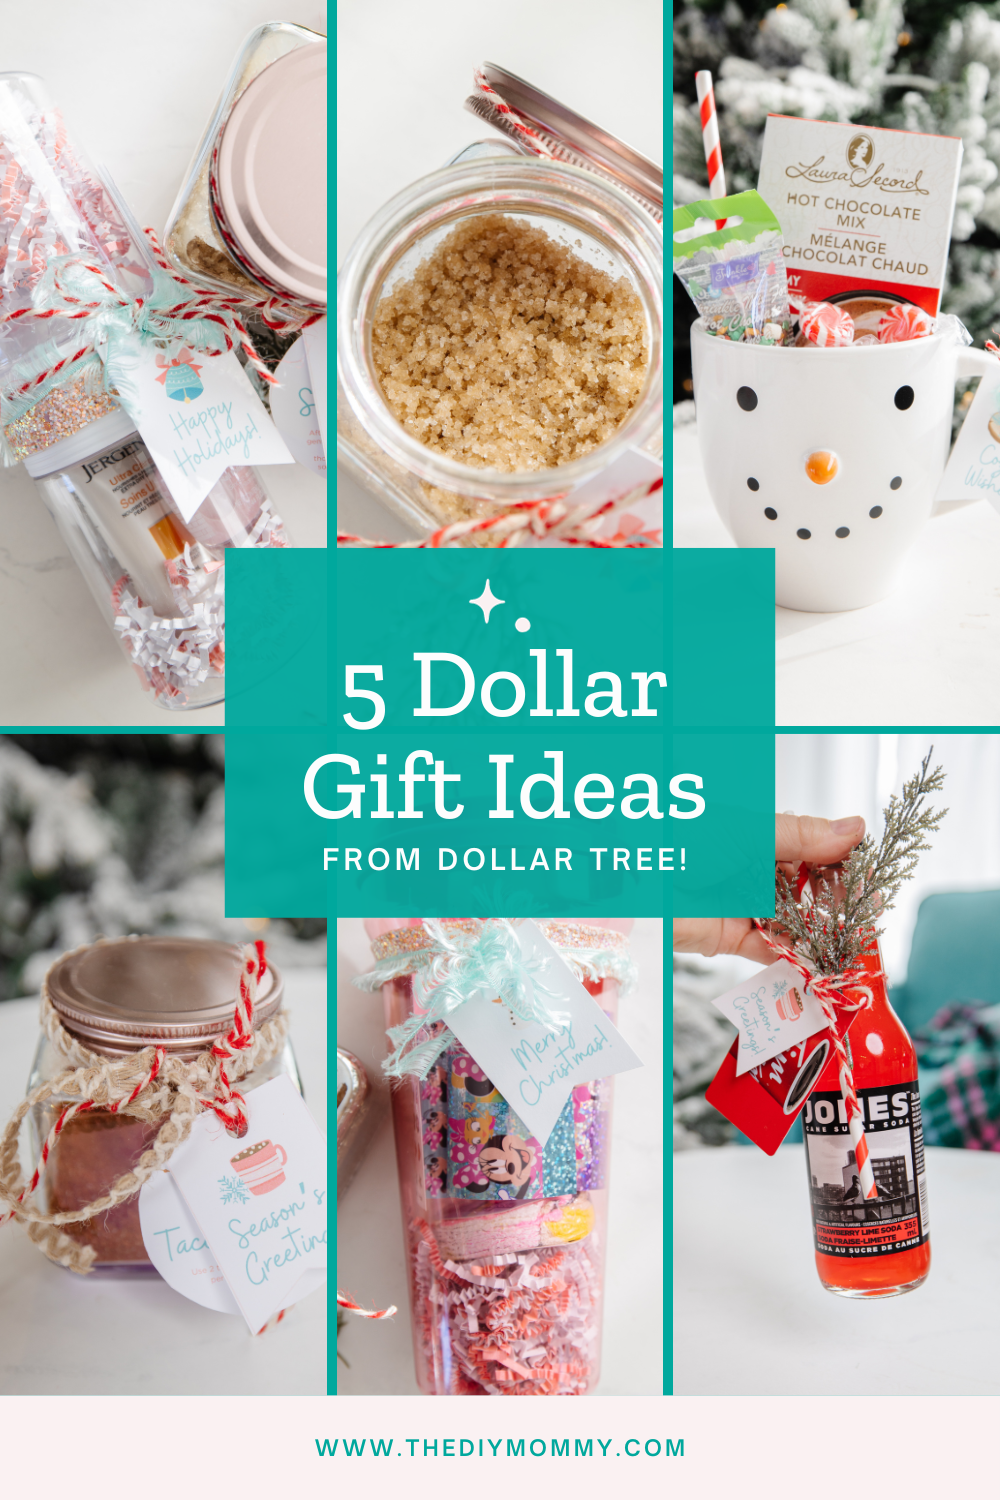 5 Dollar Gifts for Christmas from Dollar Tree